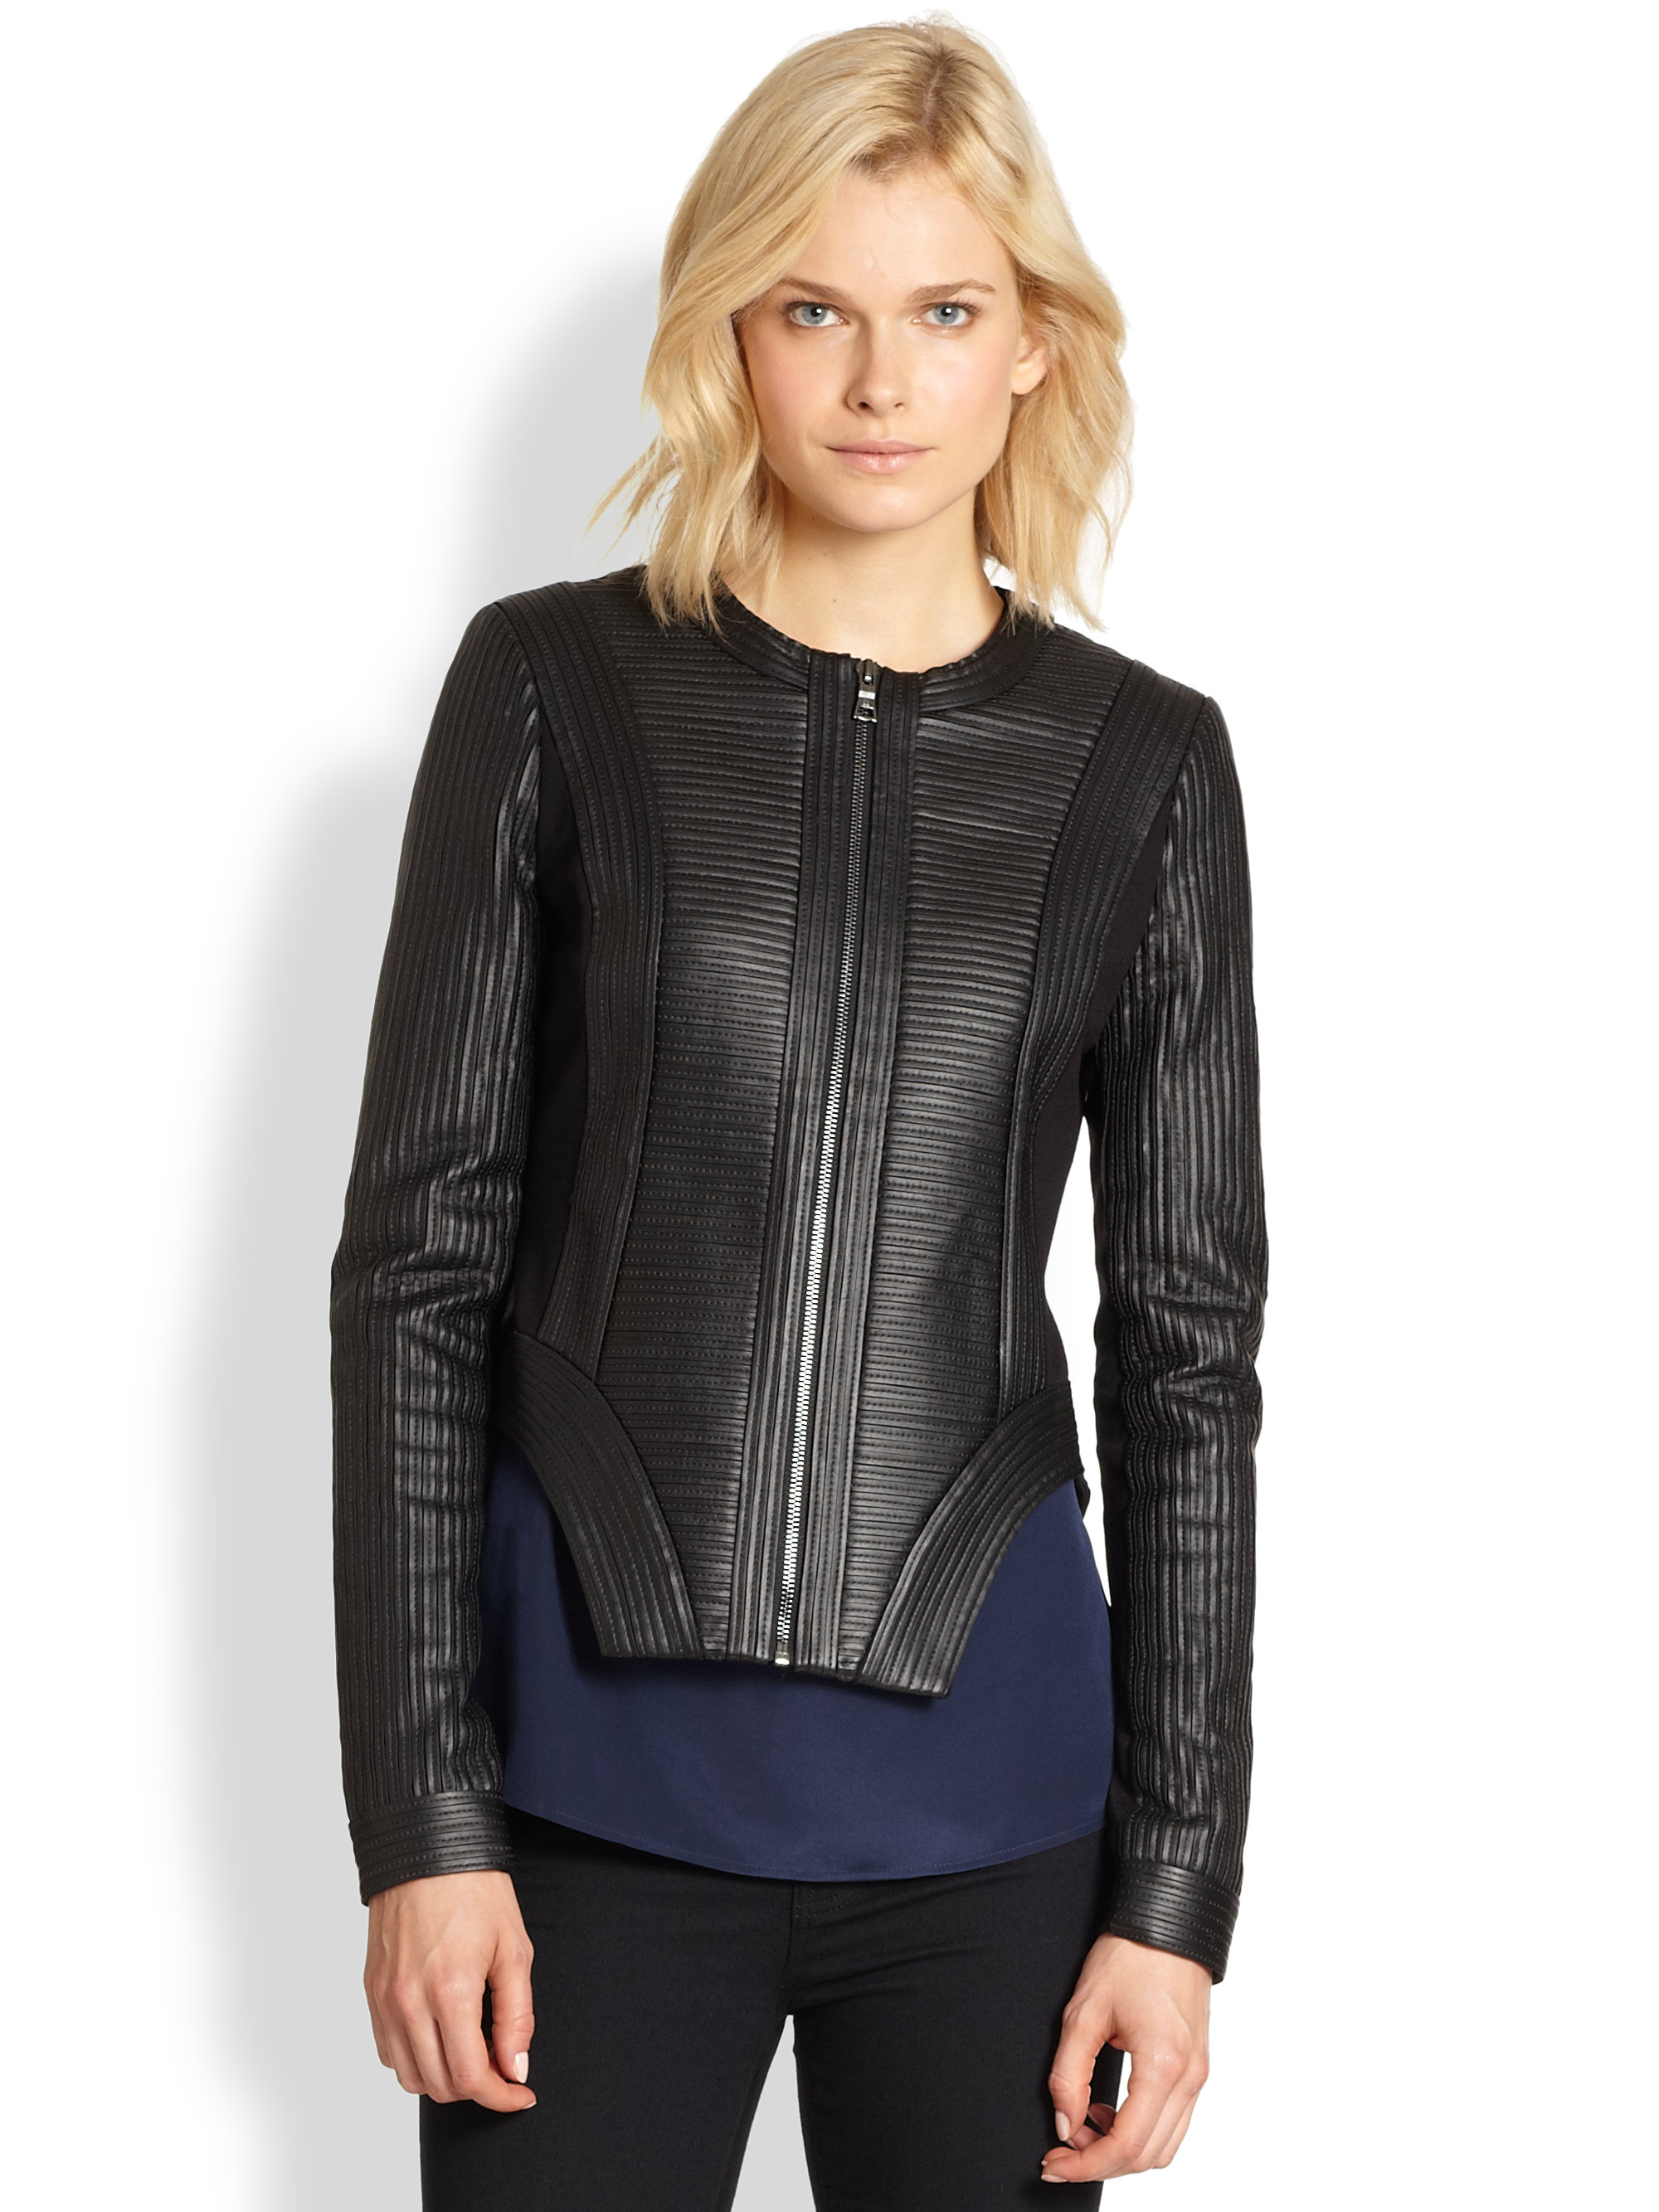 Lyst - Bcbgmaxazria Ribbed Paneled Faux Leather Jacket in Black